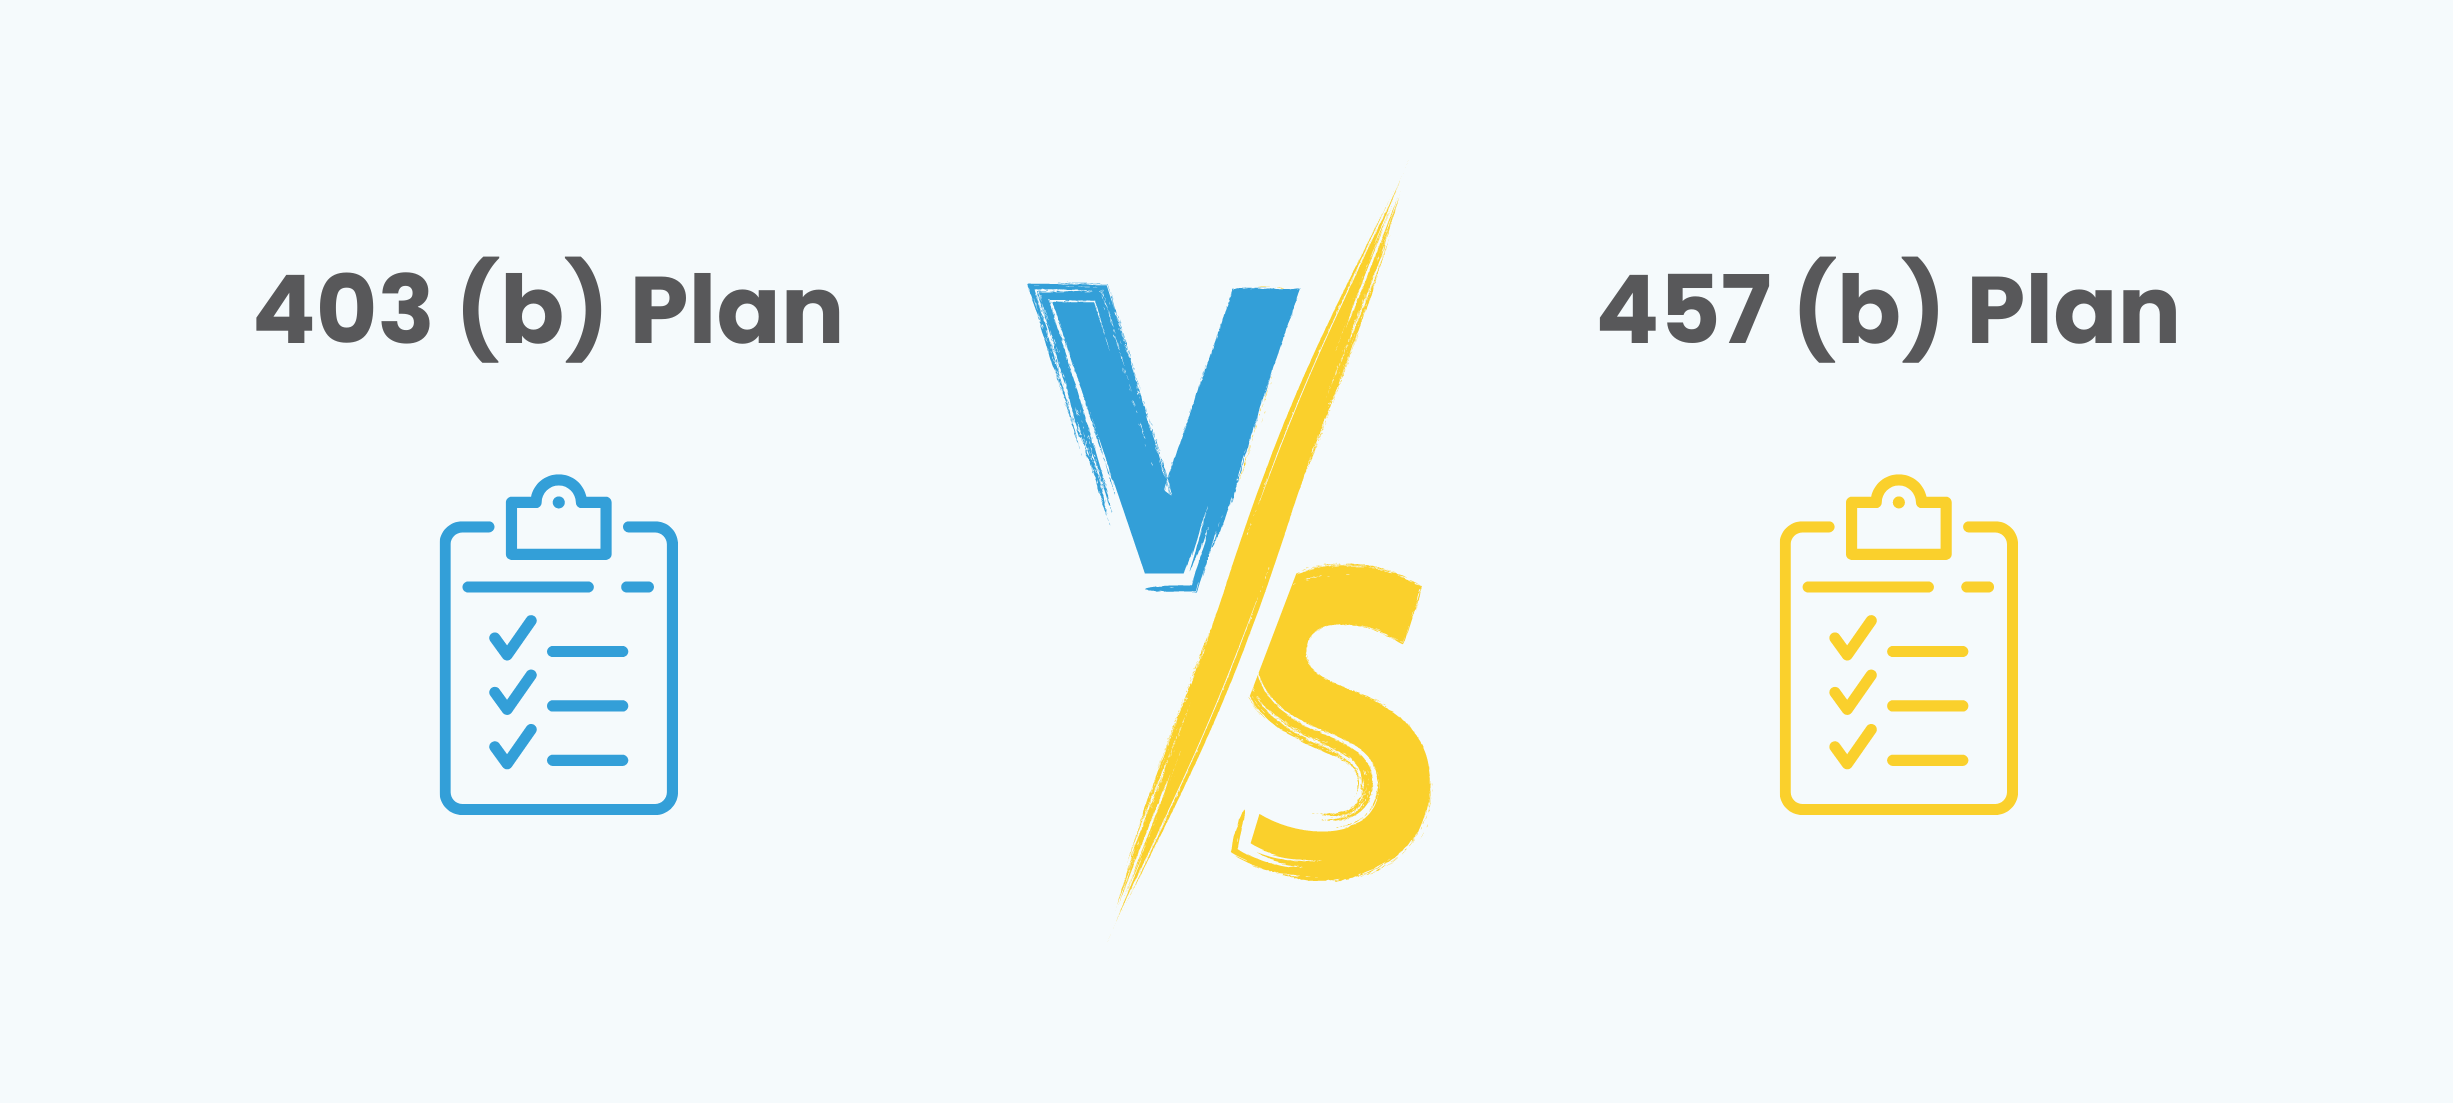 403 Plan vs. 457(b) Plan: What's the Difference?